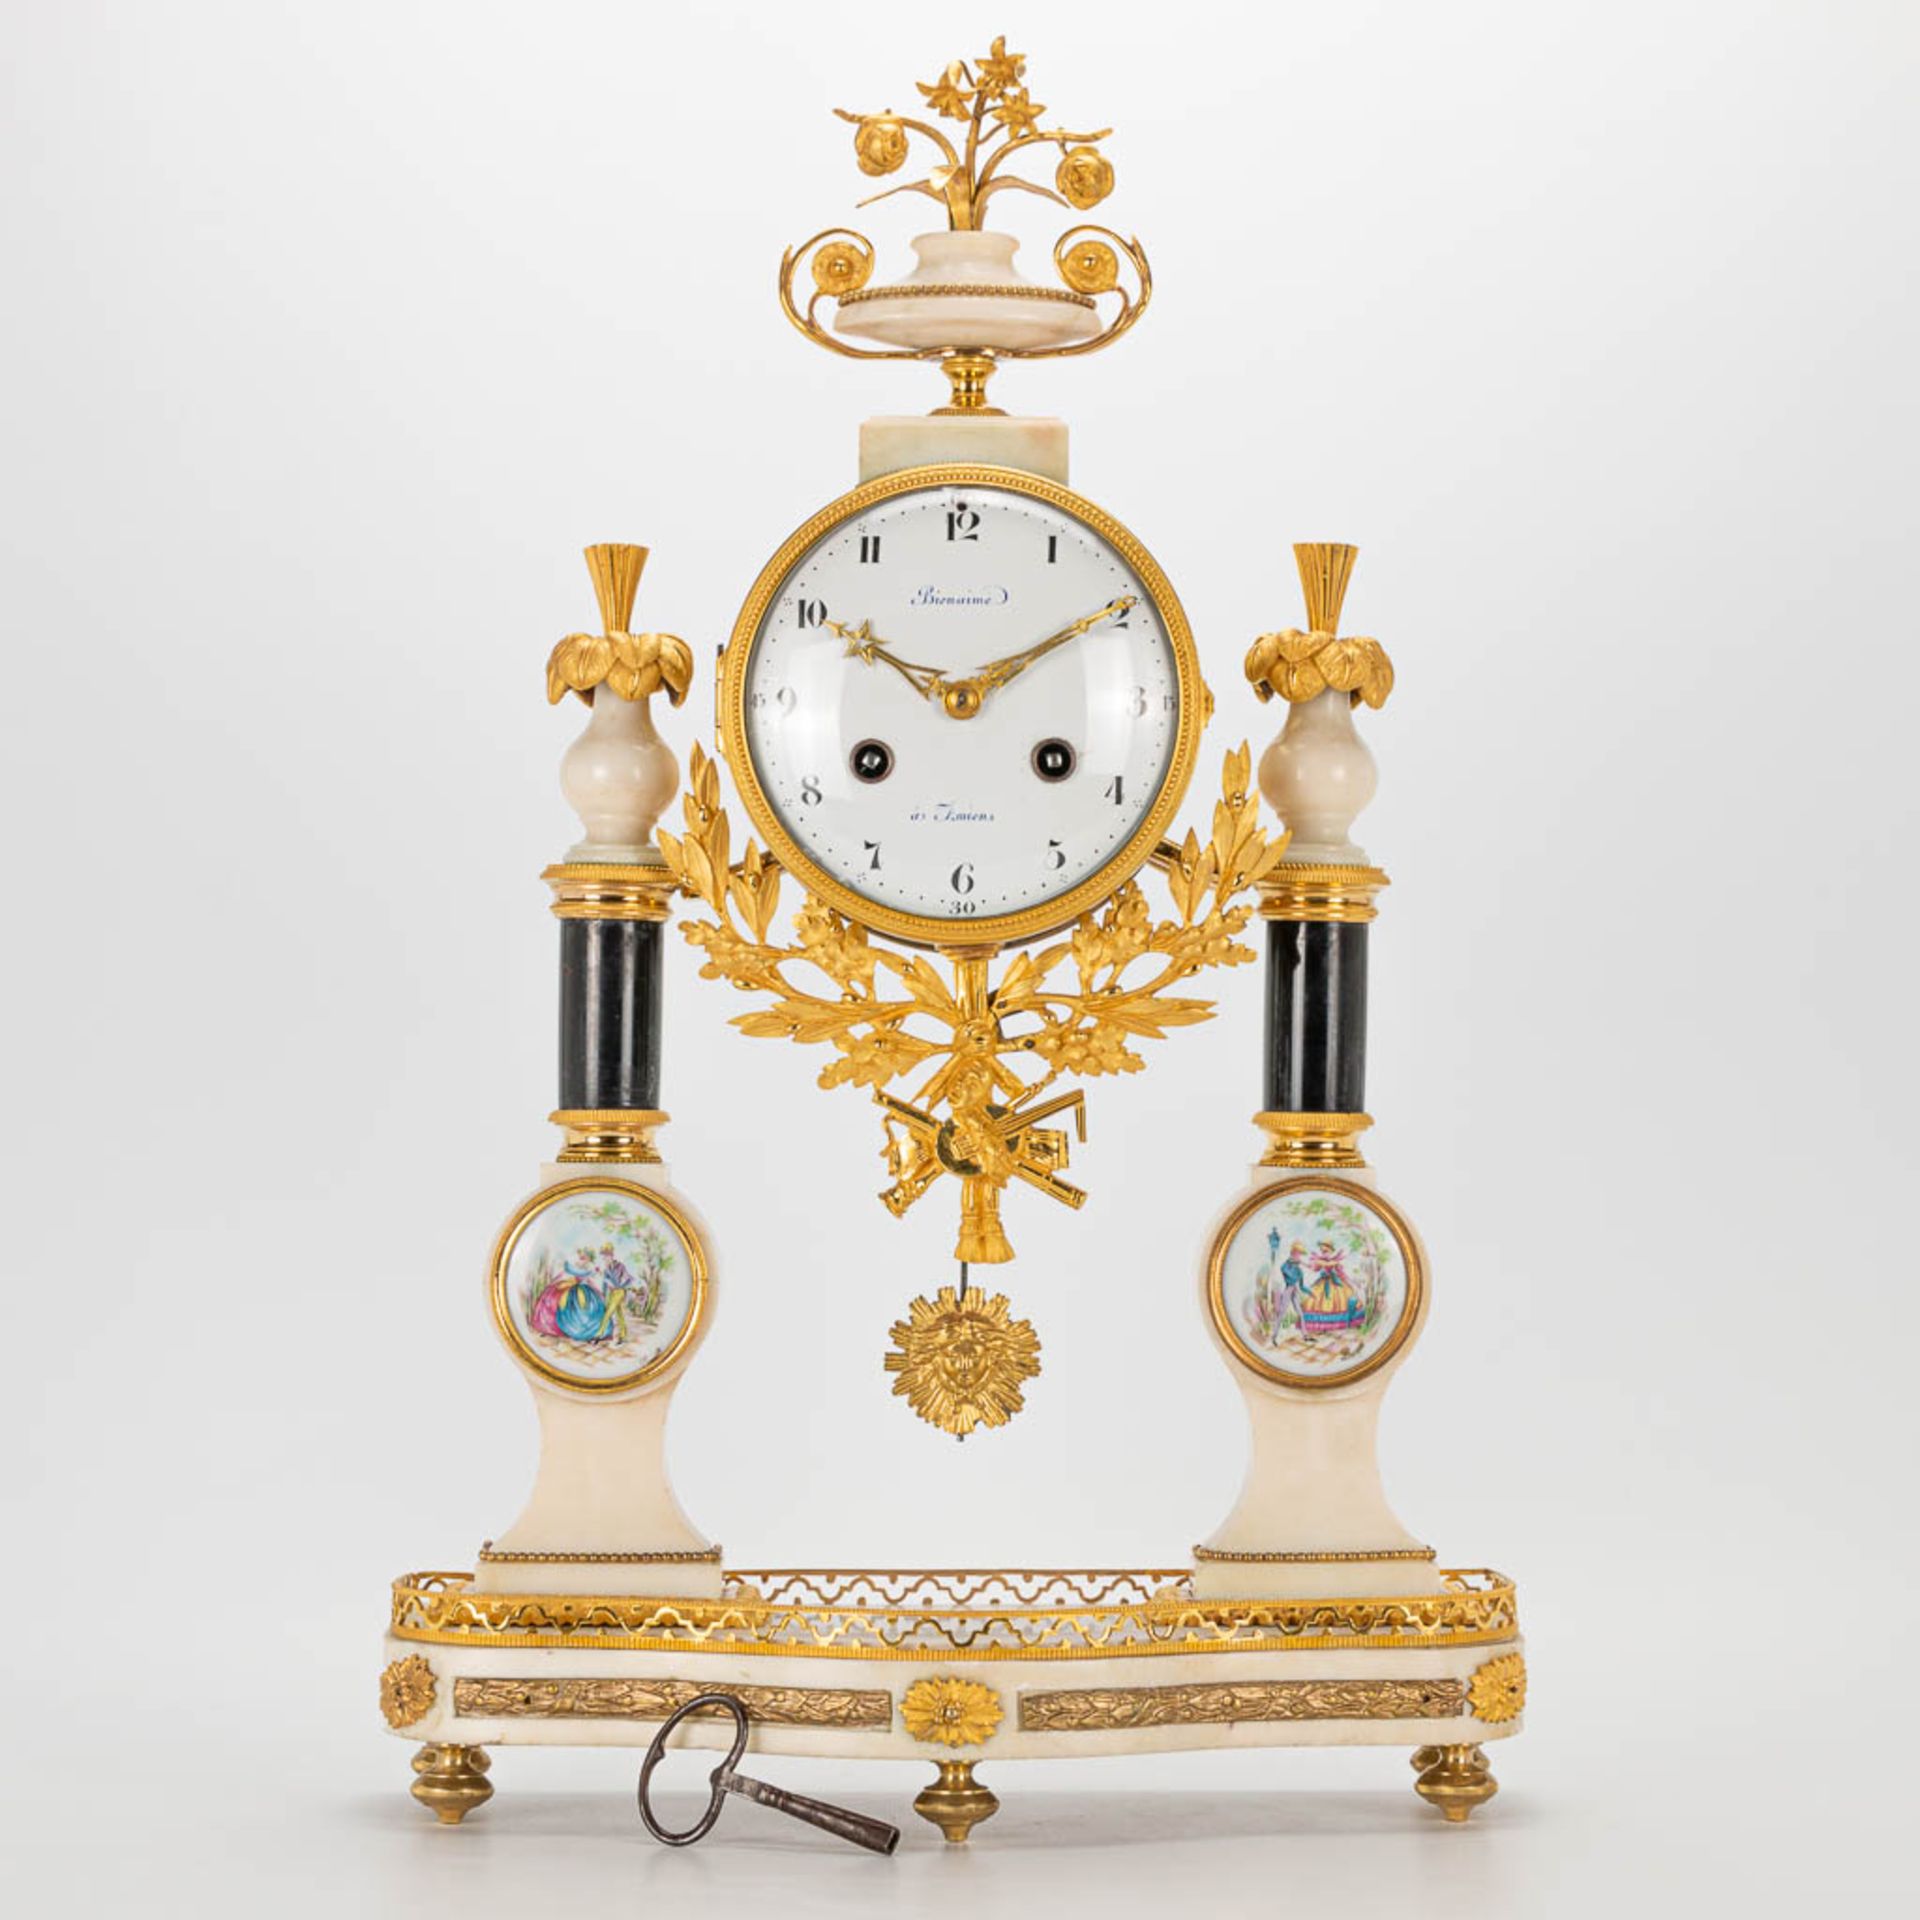 A Louis XVI style column clock made of bronze and marble, with handpainted Limoges plaques and marke - Image 6 of 23